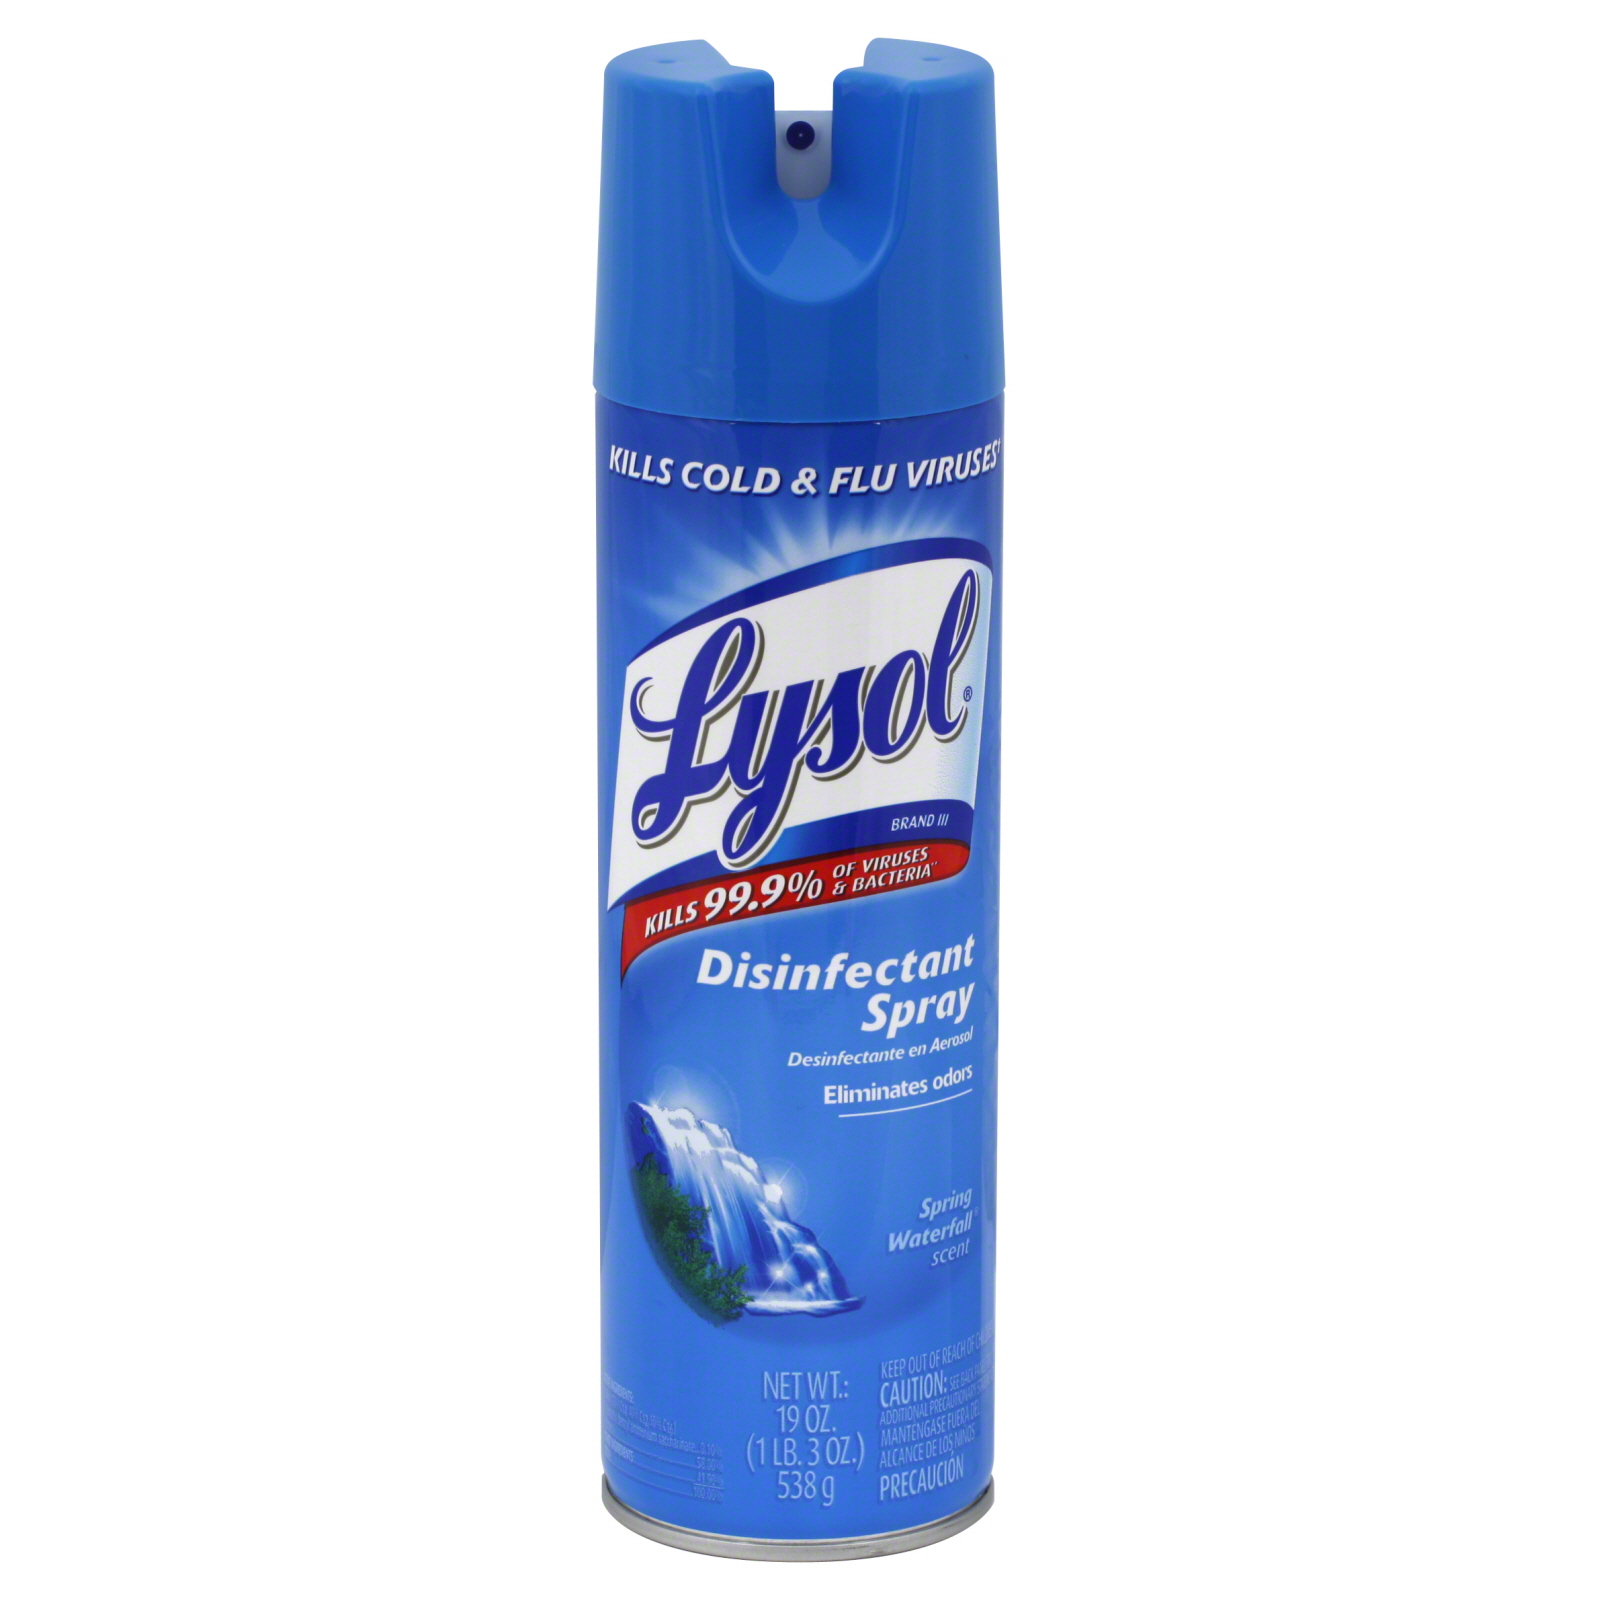 Lysol Disinfectant Spray, Spring Waterfall Scent, 19 oz (1 lb 3 oz) 539 g